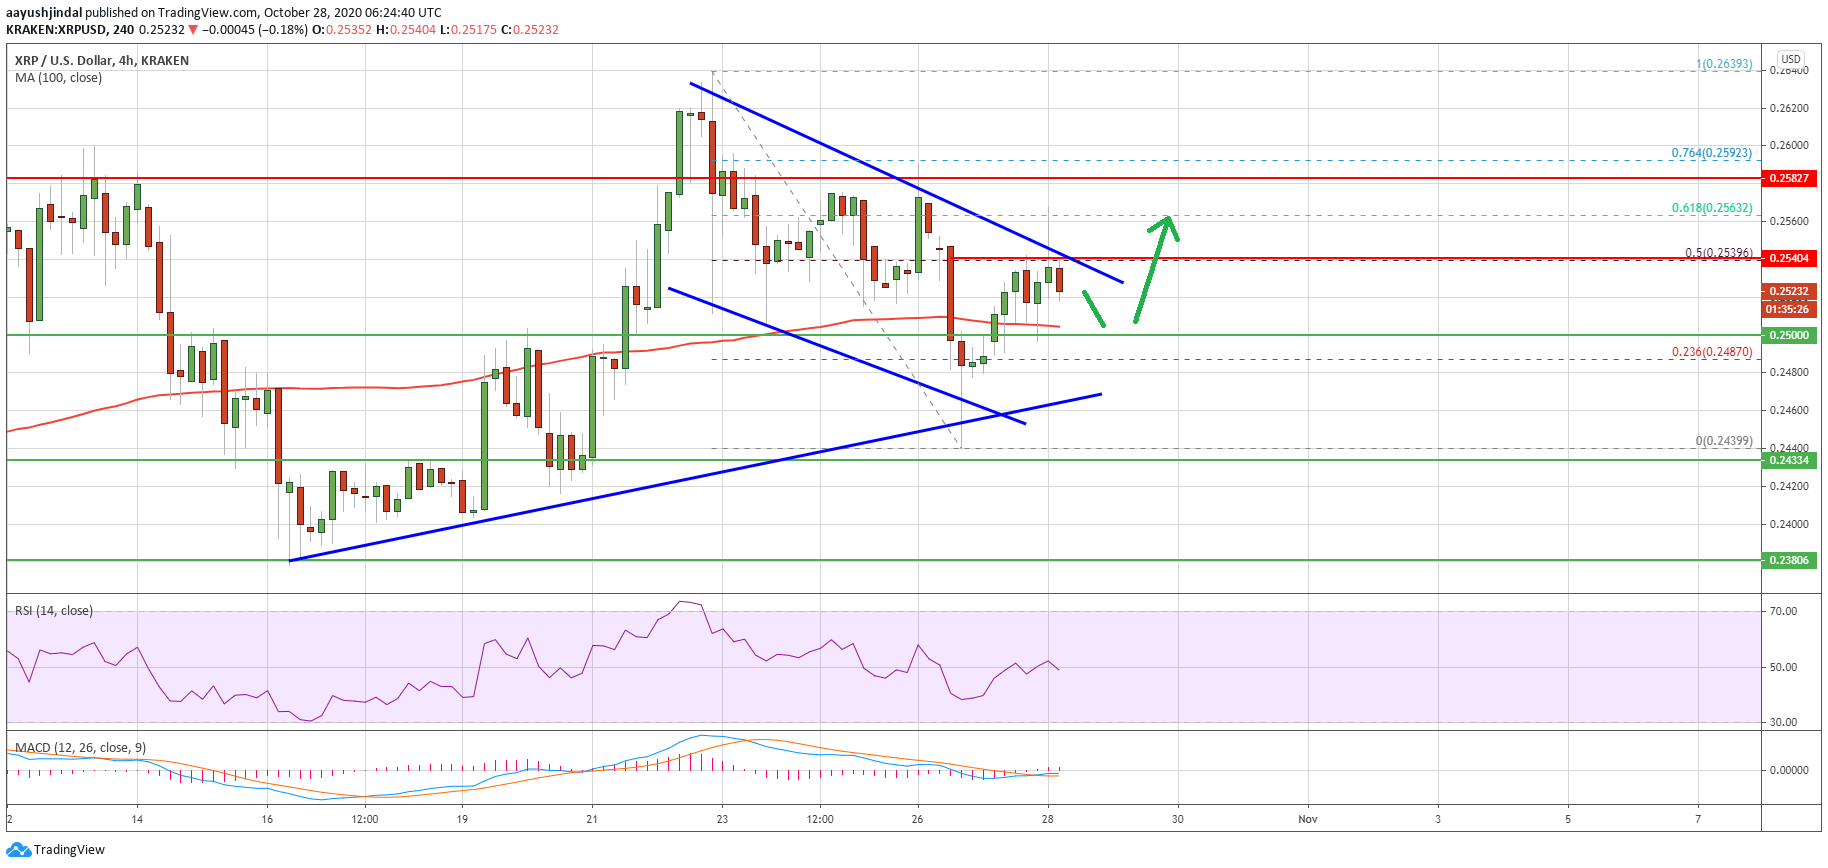 Charted: Ripple (XRP) is About to See “Liftoff” if it Clears $0.255